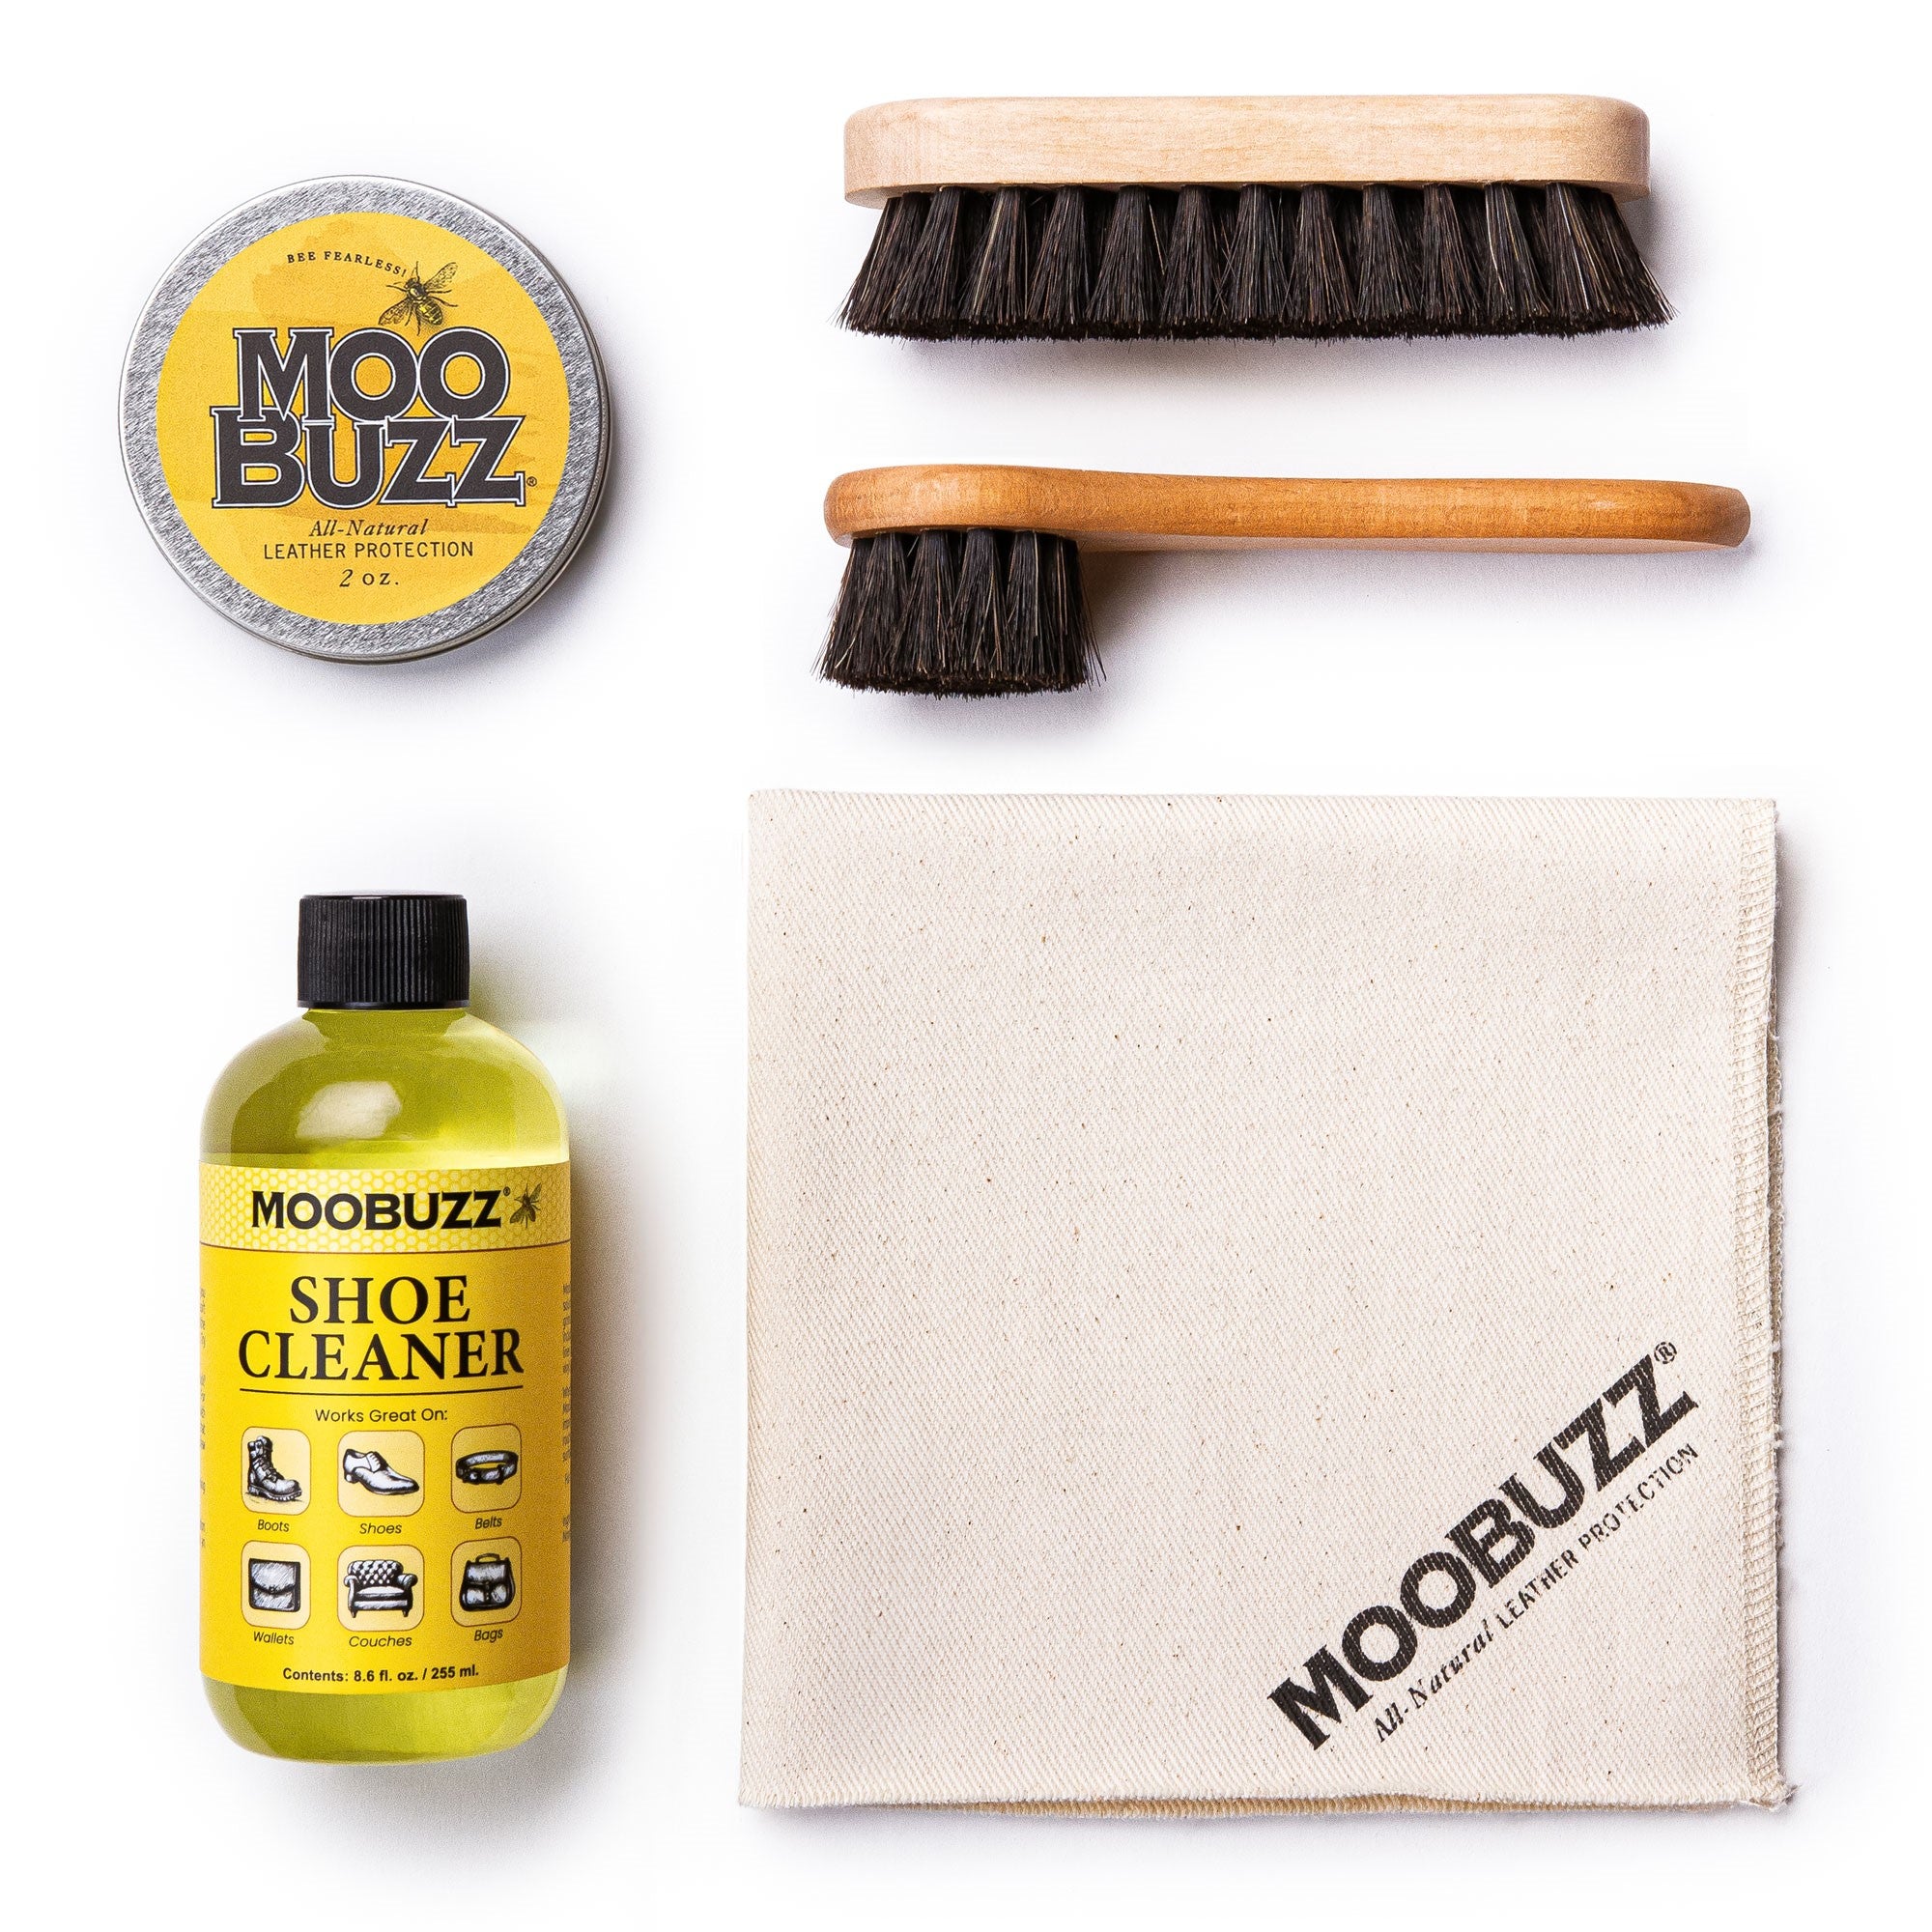 MOOBUZZ Leather Care Kit - All Natural Leather Protection